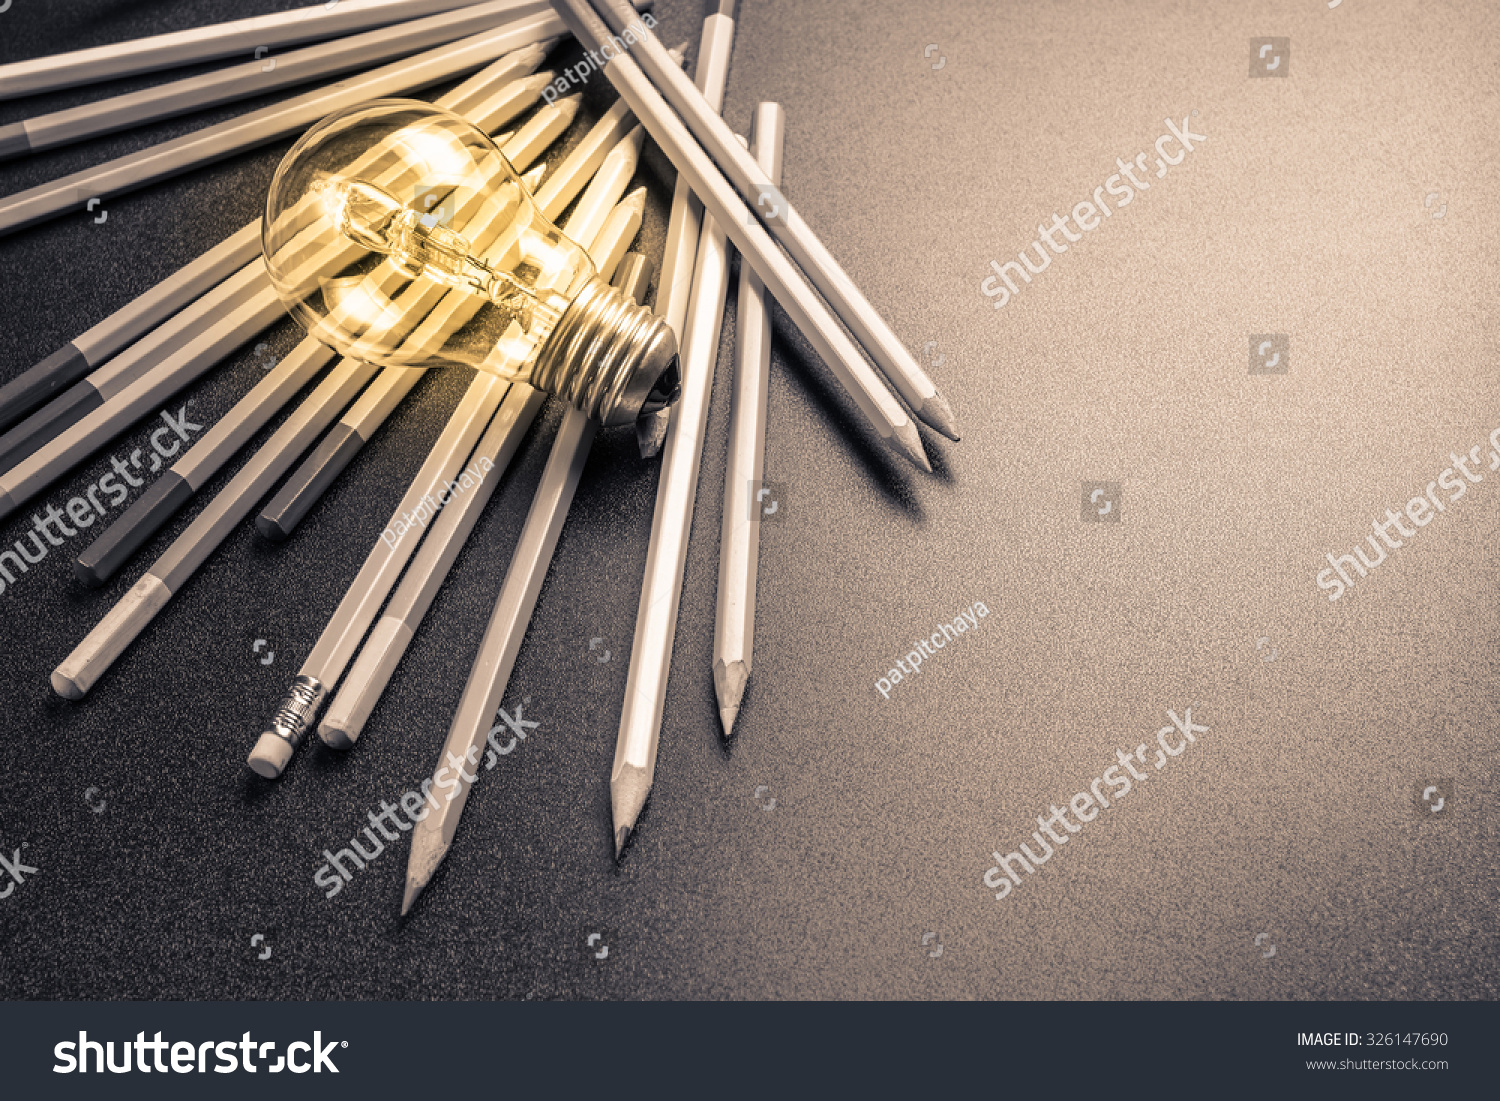 Light bulb with many pencils #326147690